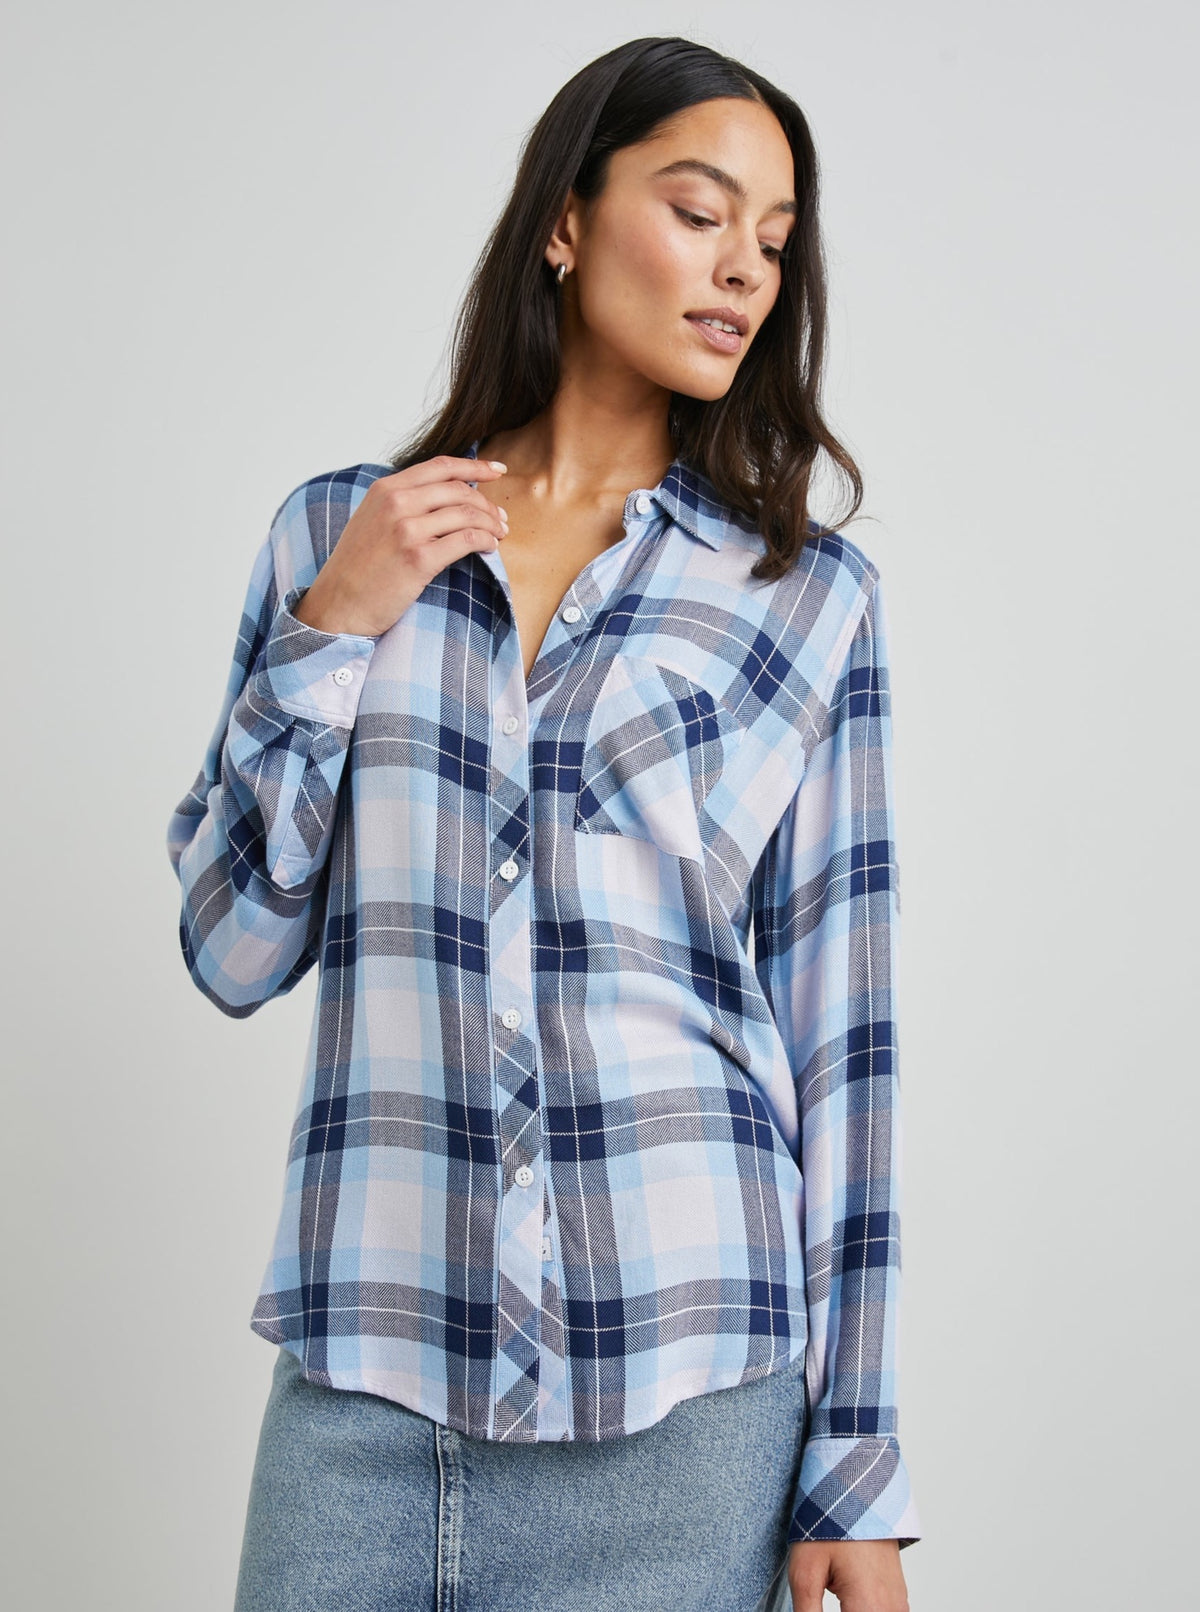 Rails Hunter Plaid Luxe Shirt in Lilac Crystal Navy - Size XS Available